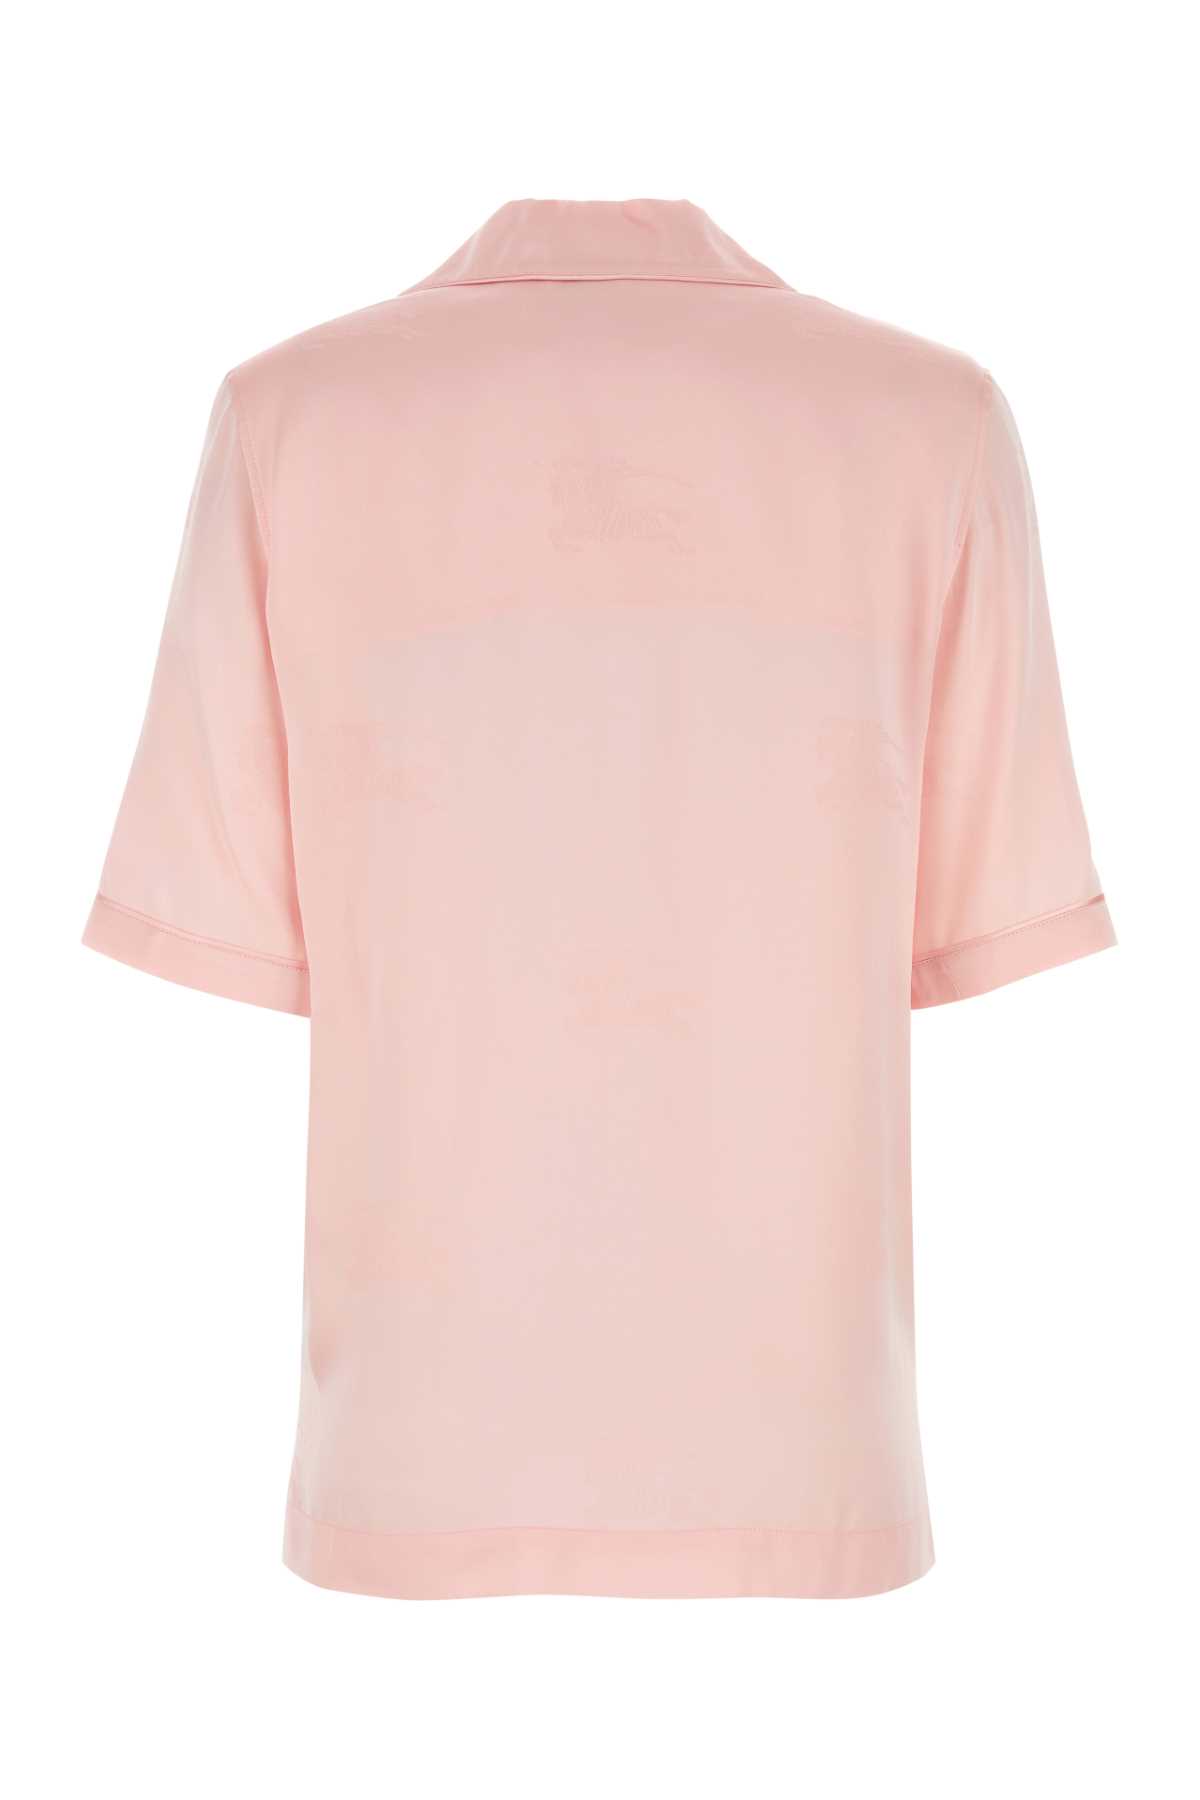 Burberry Pastel Pink Satin Shirt In Softblossom